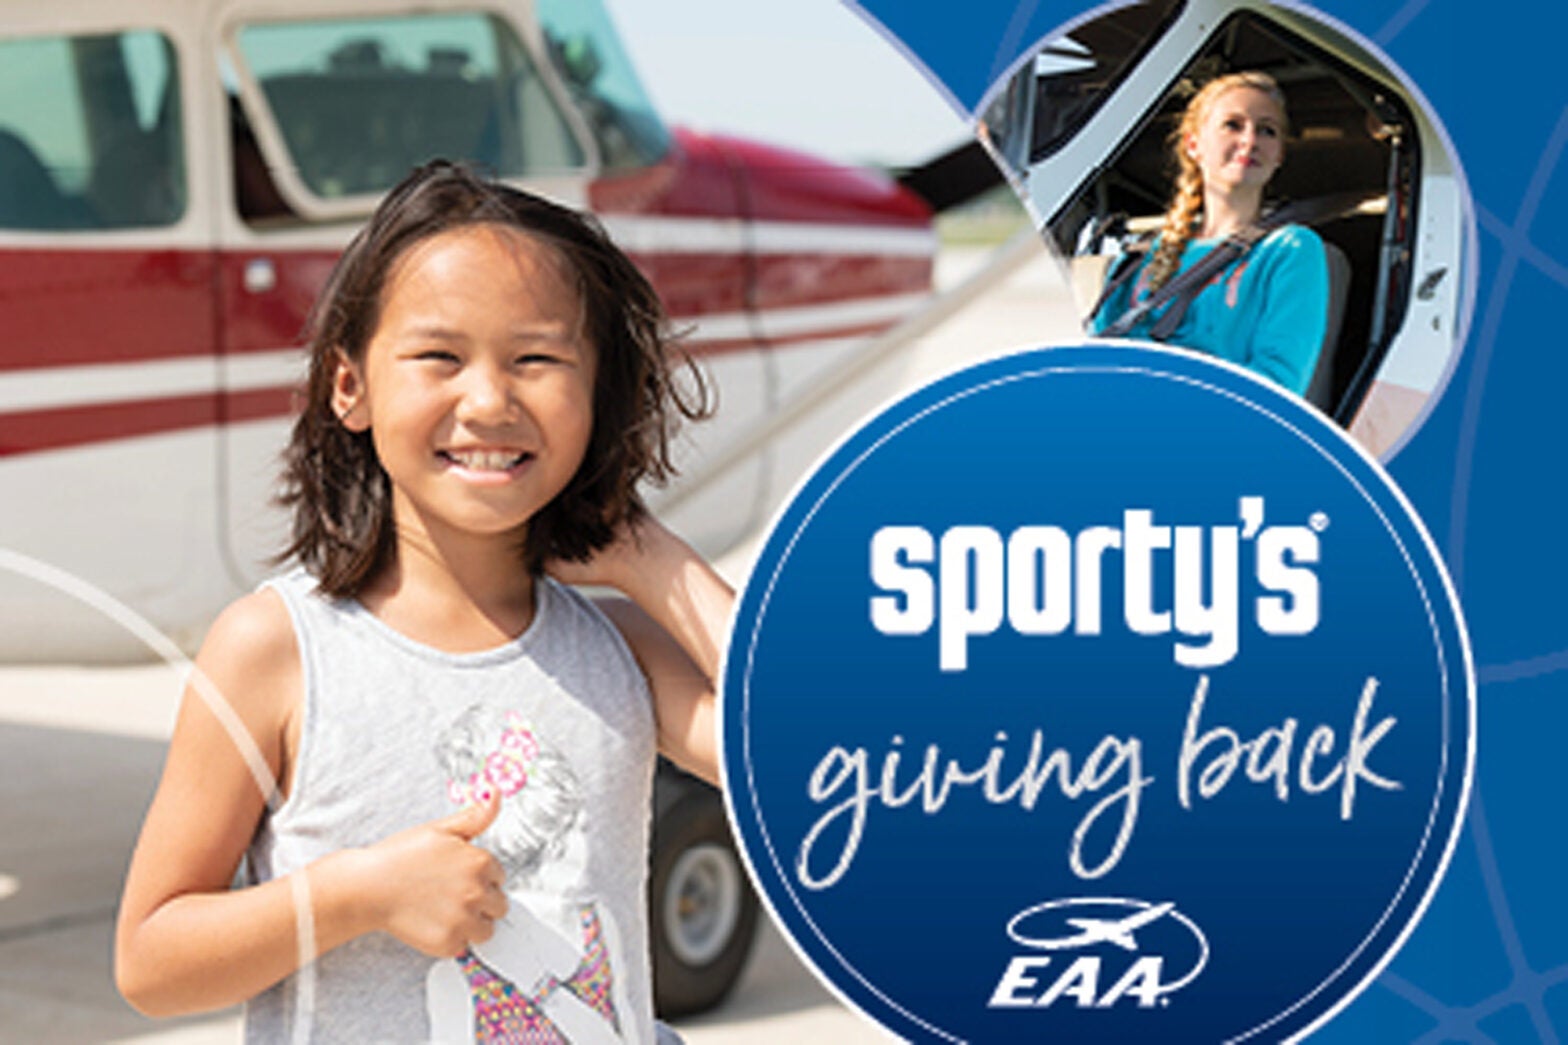 Sporty’s Matching Program Supports EAA Foundation